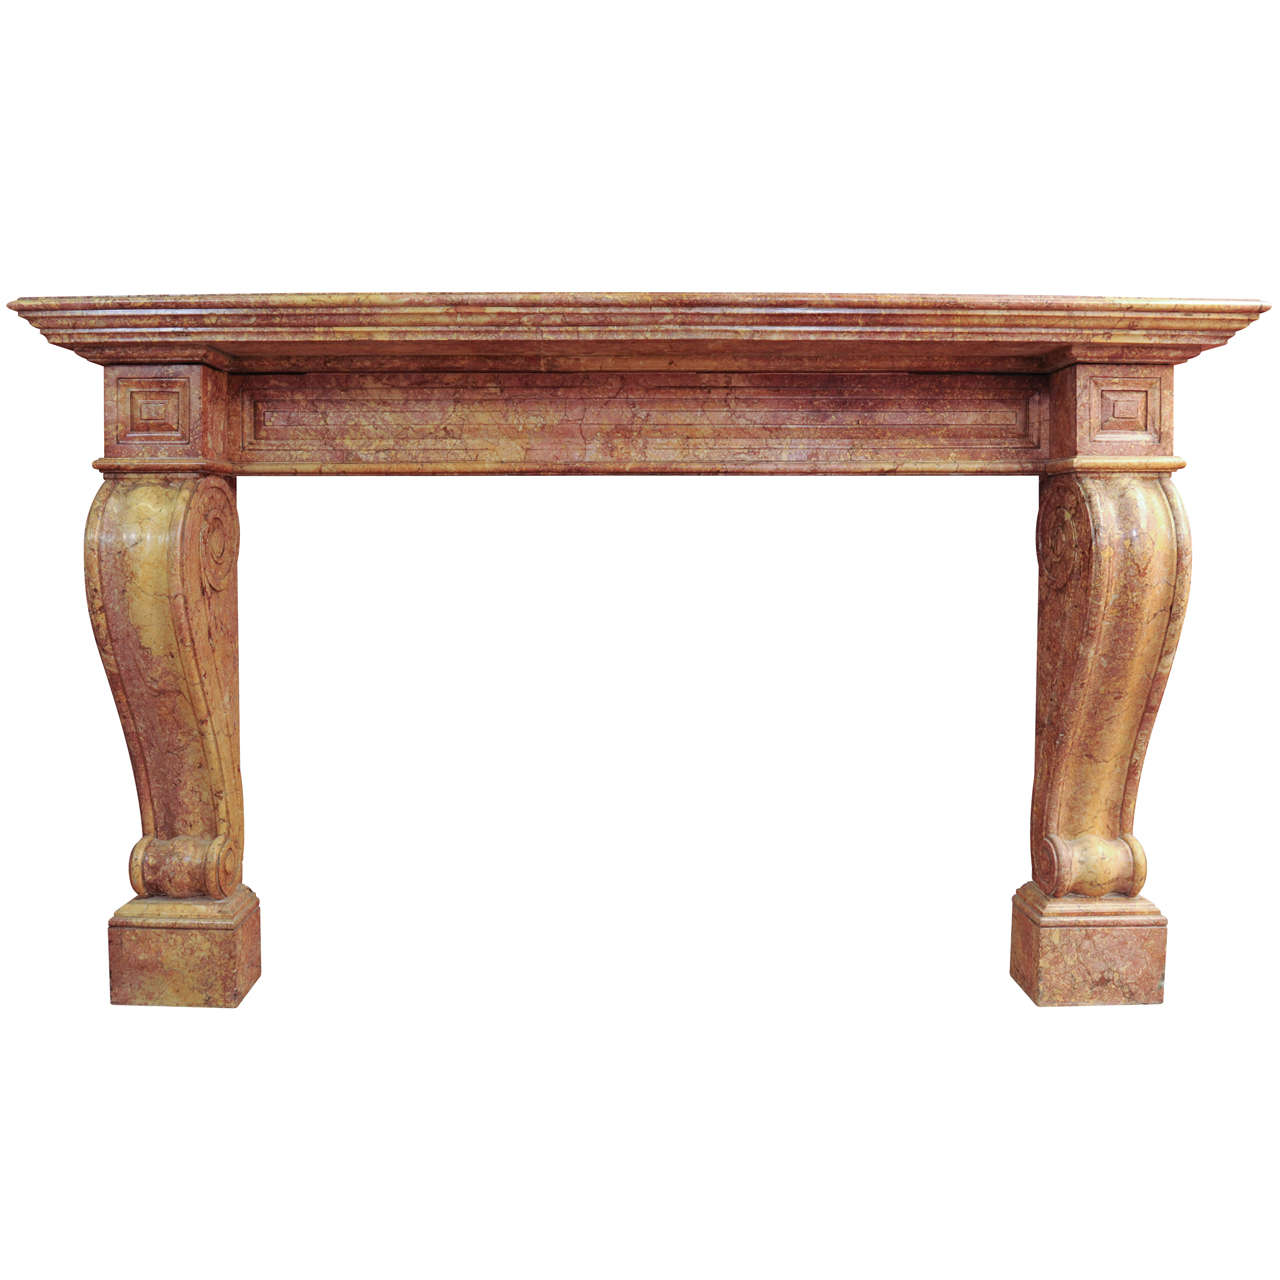 A 19th century French Empire marble fireplace / mantel piece, circa 1820